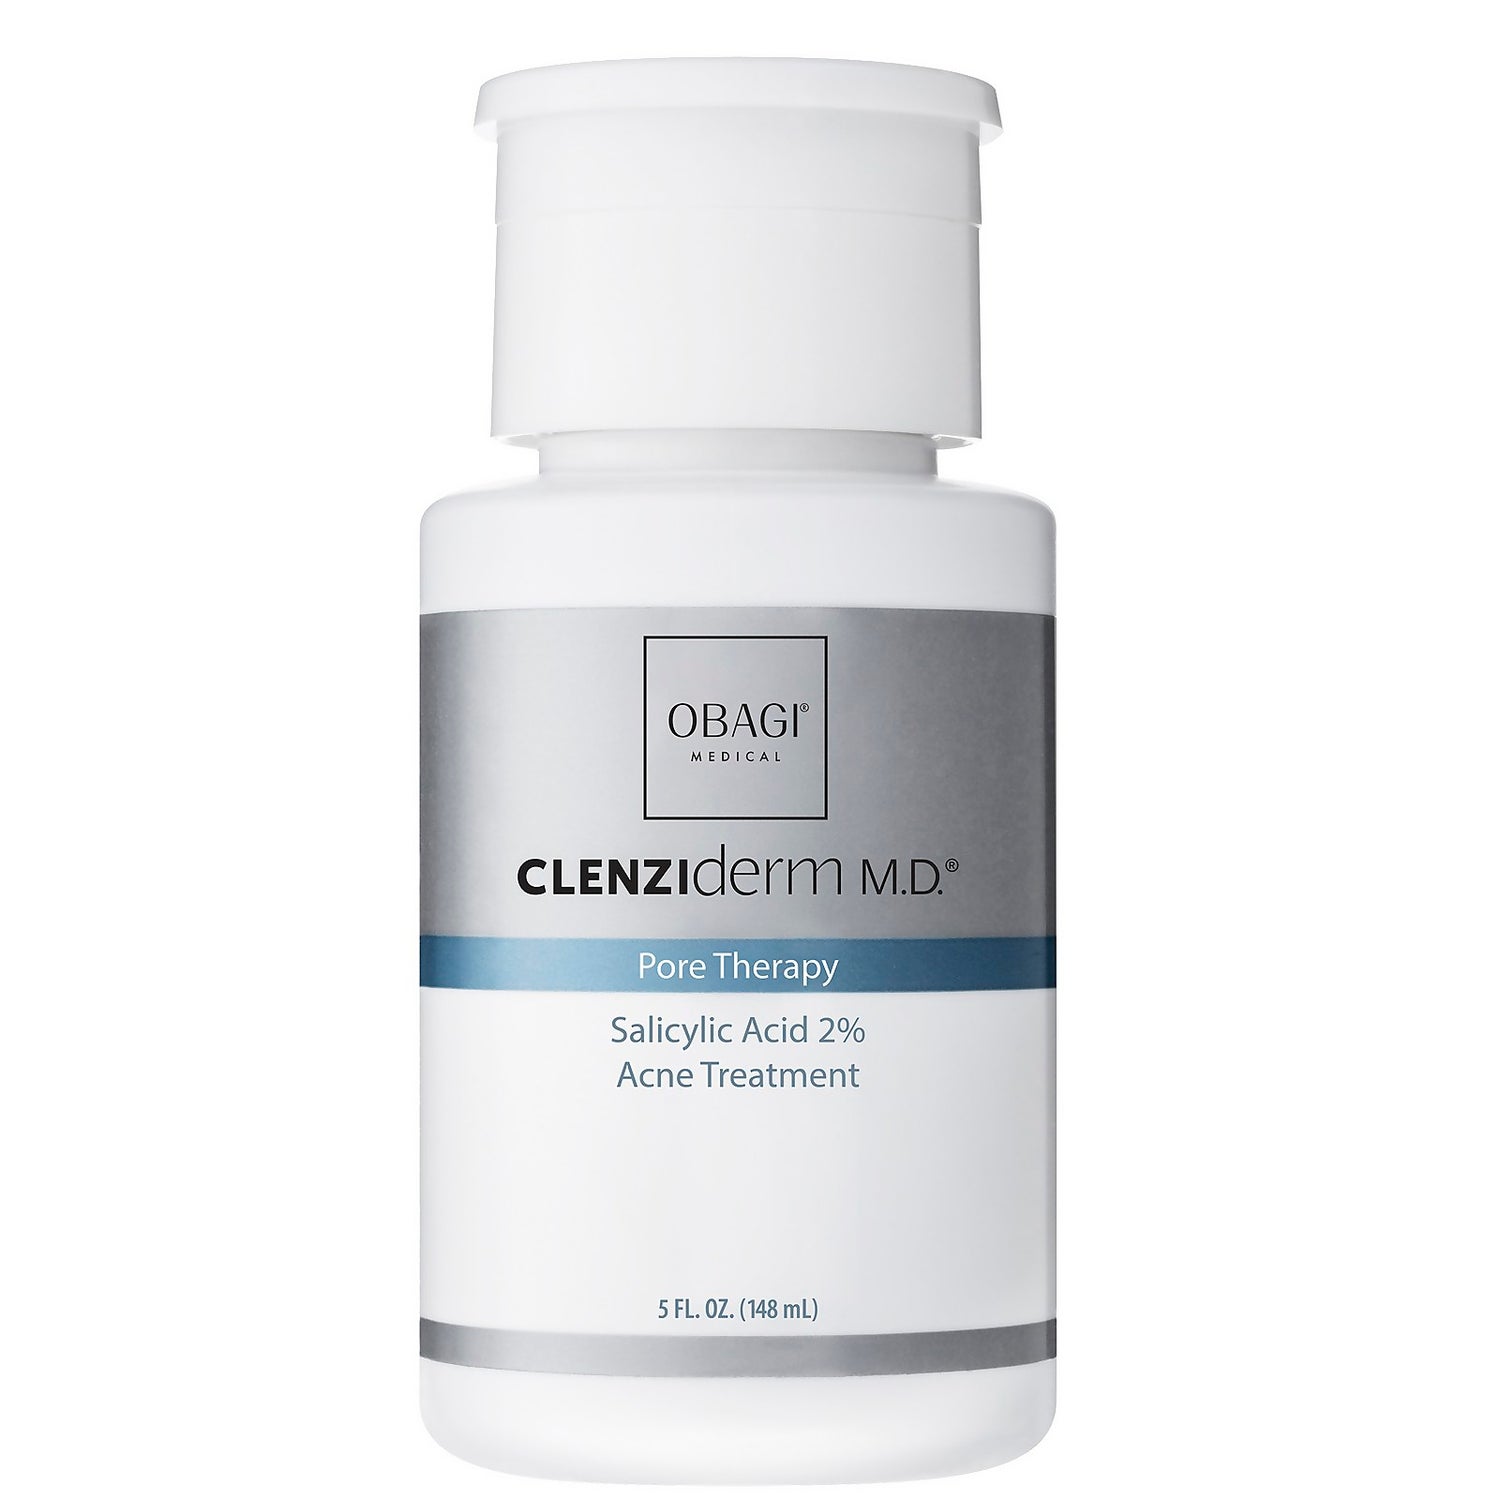 Obagi Medical Clenziderm M.D. Pore Therapy